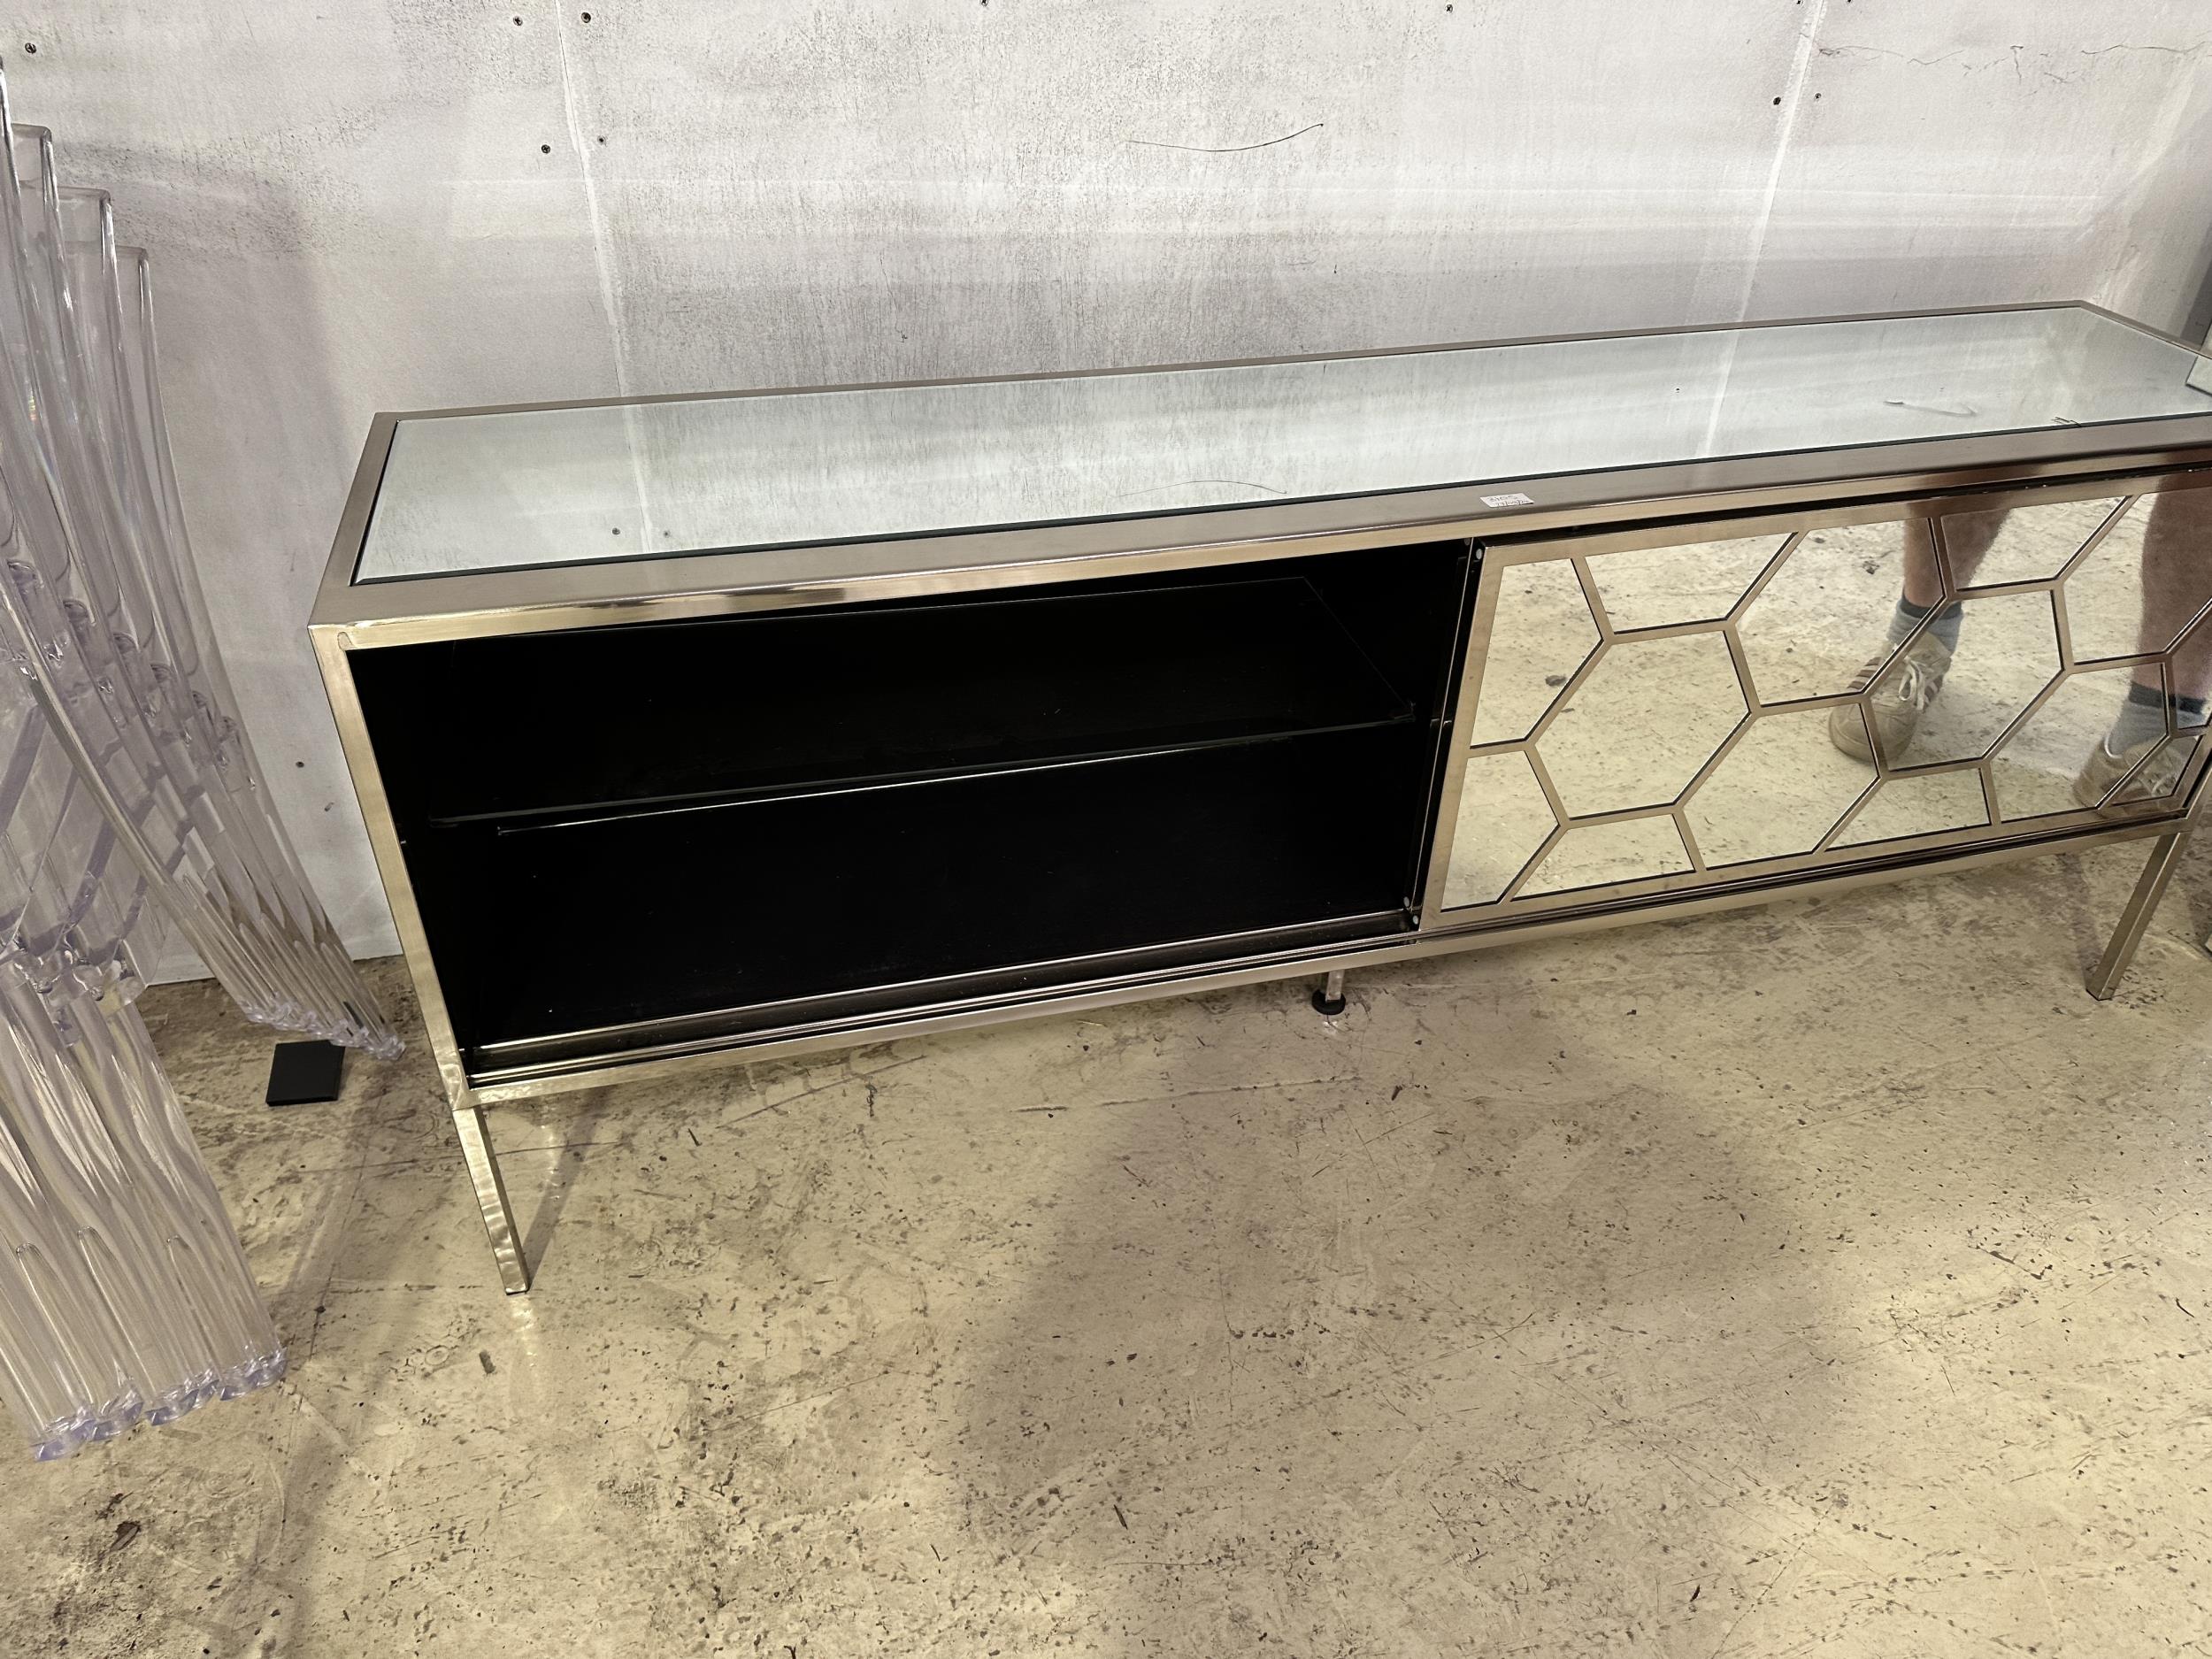 A MIRRORED SIDEBOARD WITH TWO SLIDING DOORS (FROM A DEVELOPER'S SHOW HOME - BELIEVED UNUSED) - Image 5 of 5